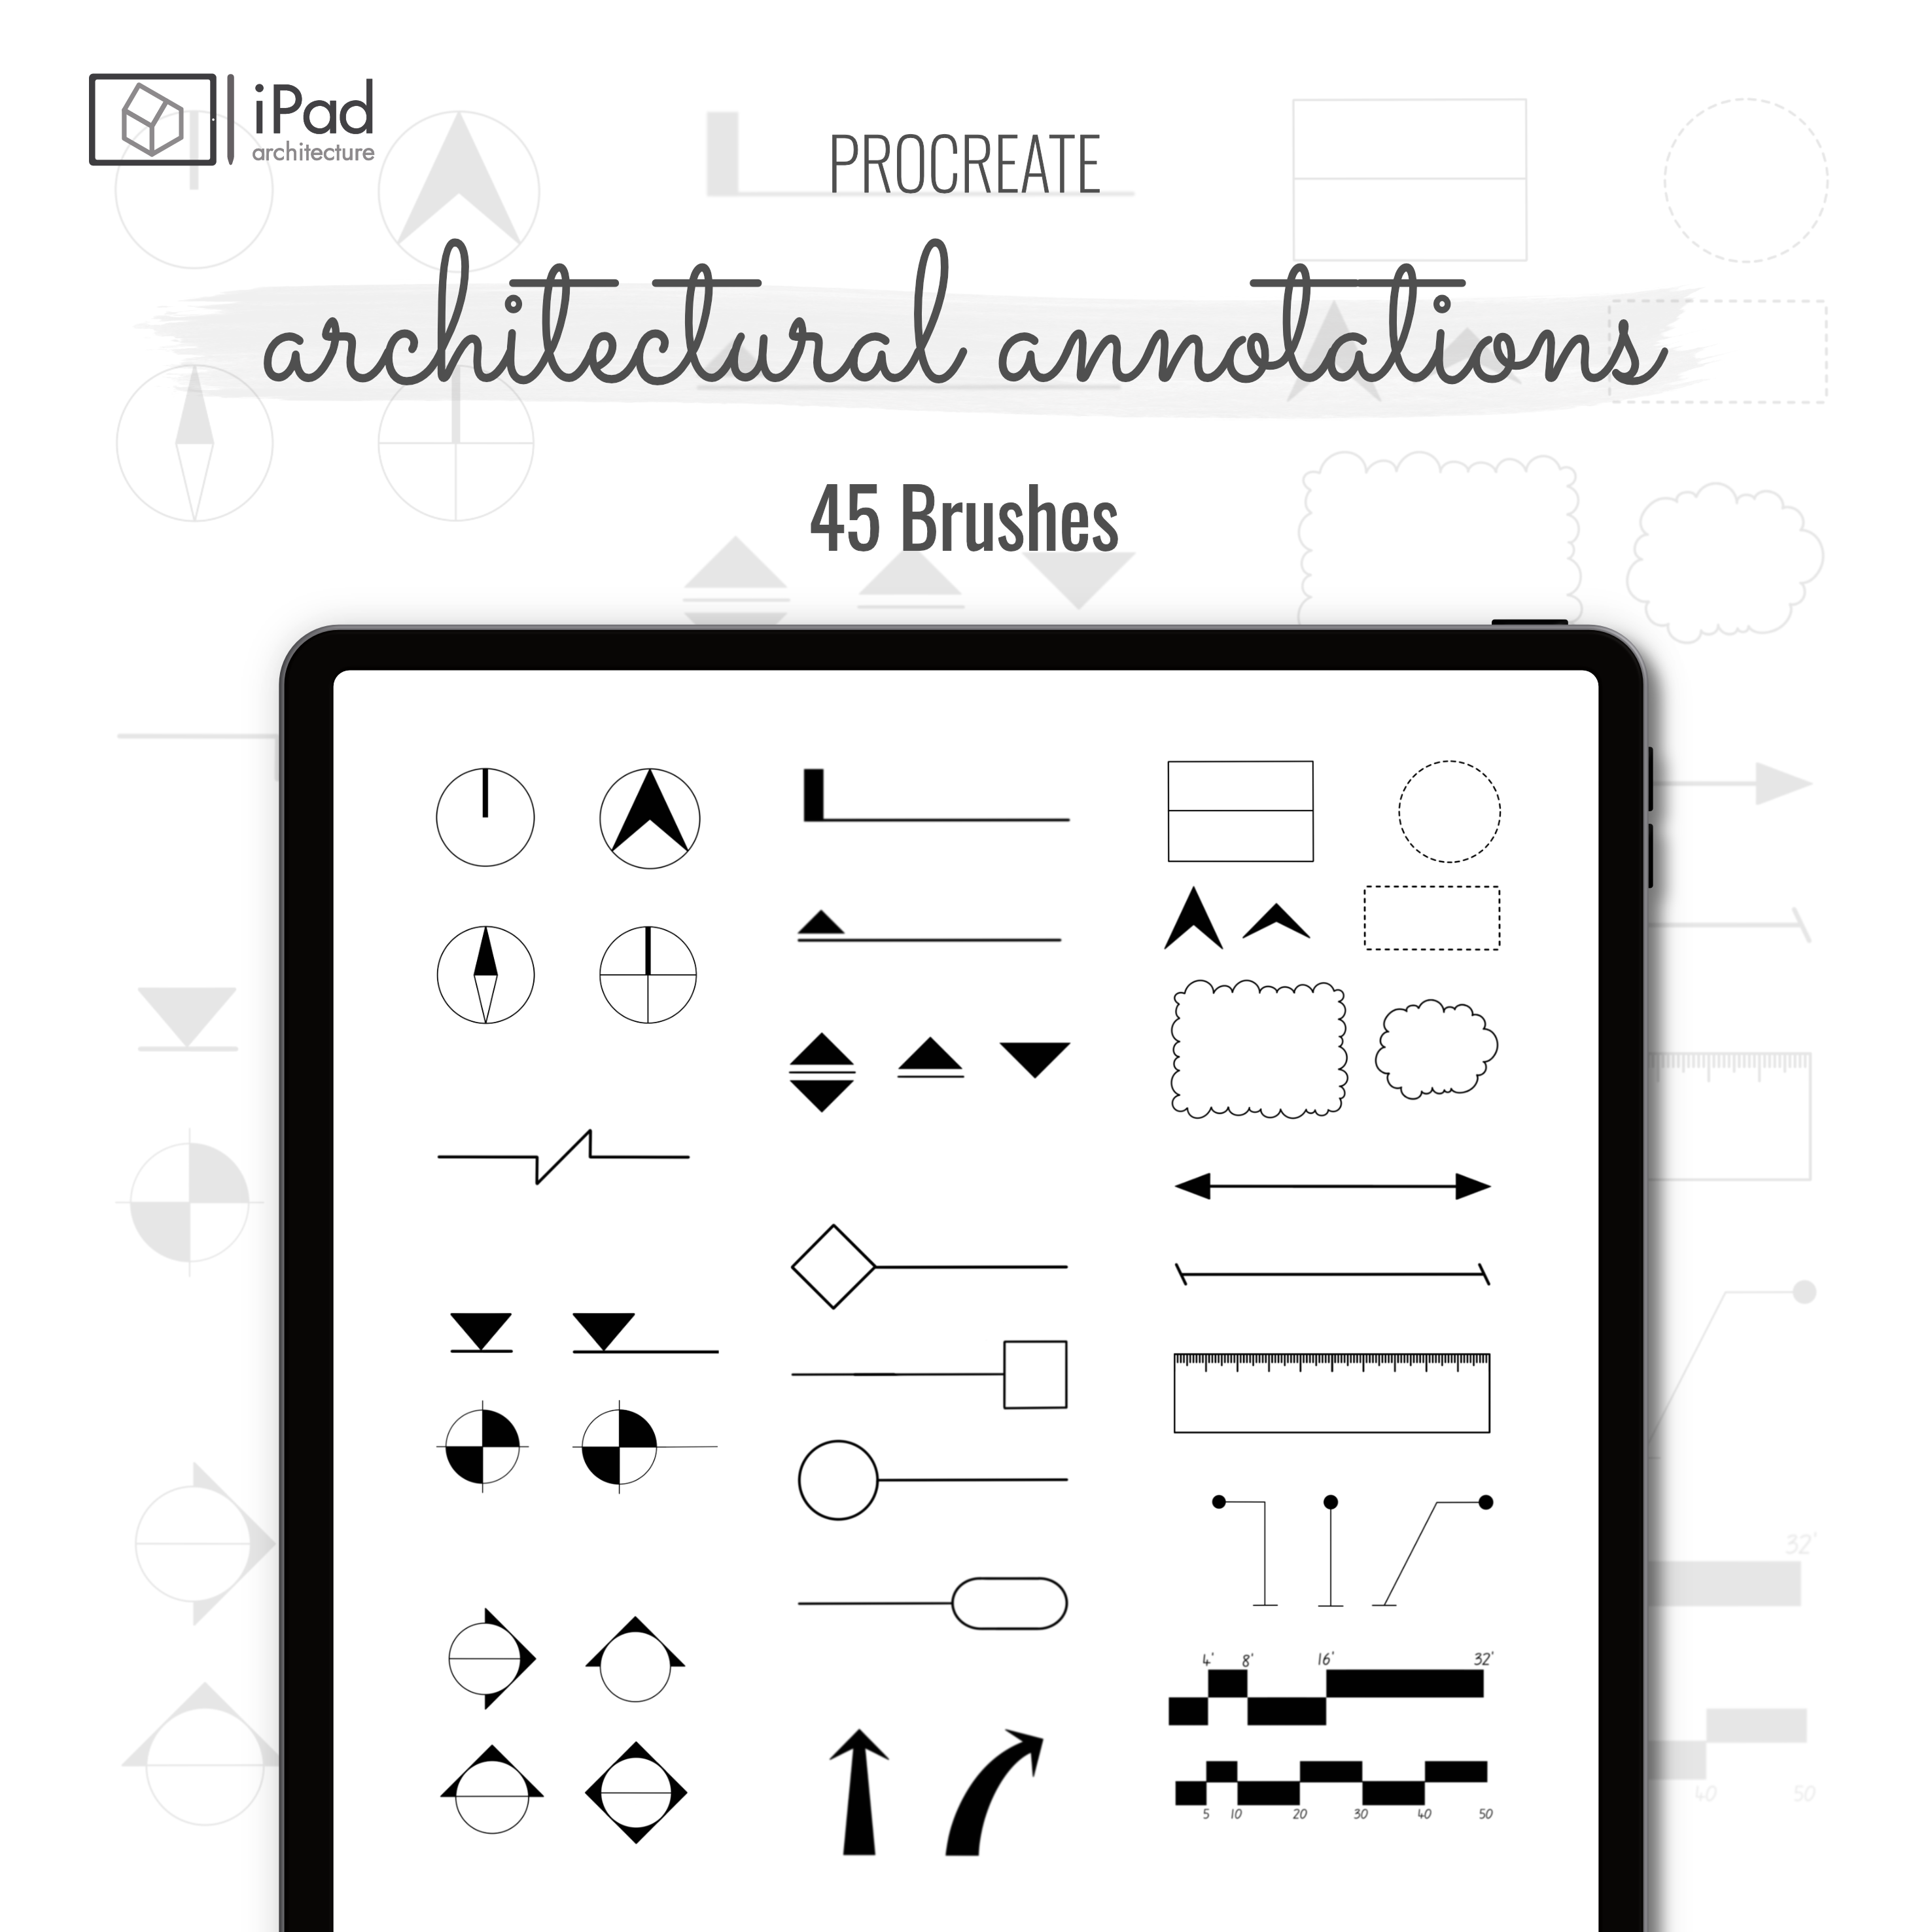 Free - Procreate Architectural Annotations Brushset PNG - Toffu Co